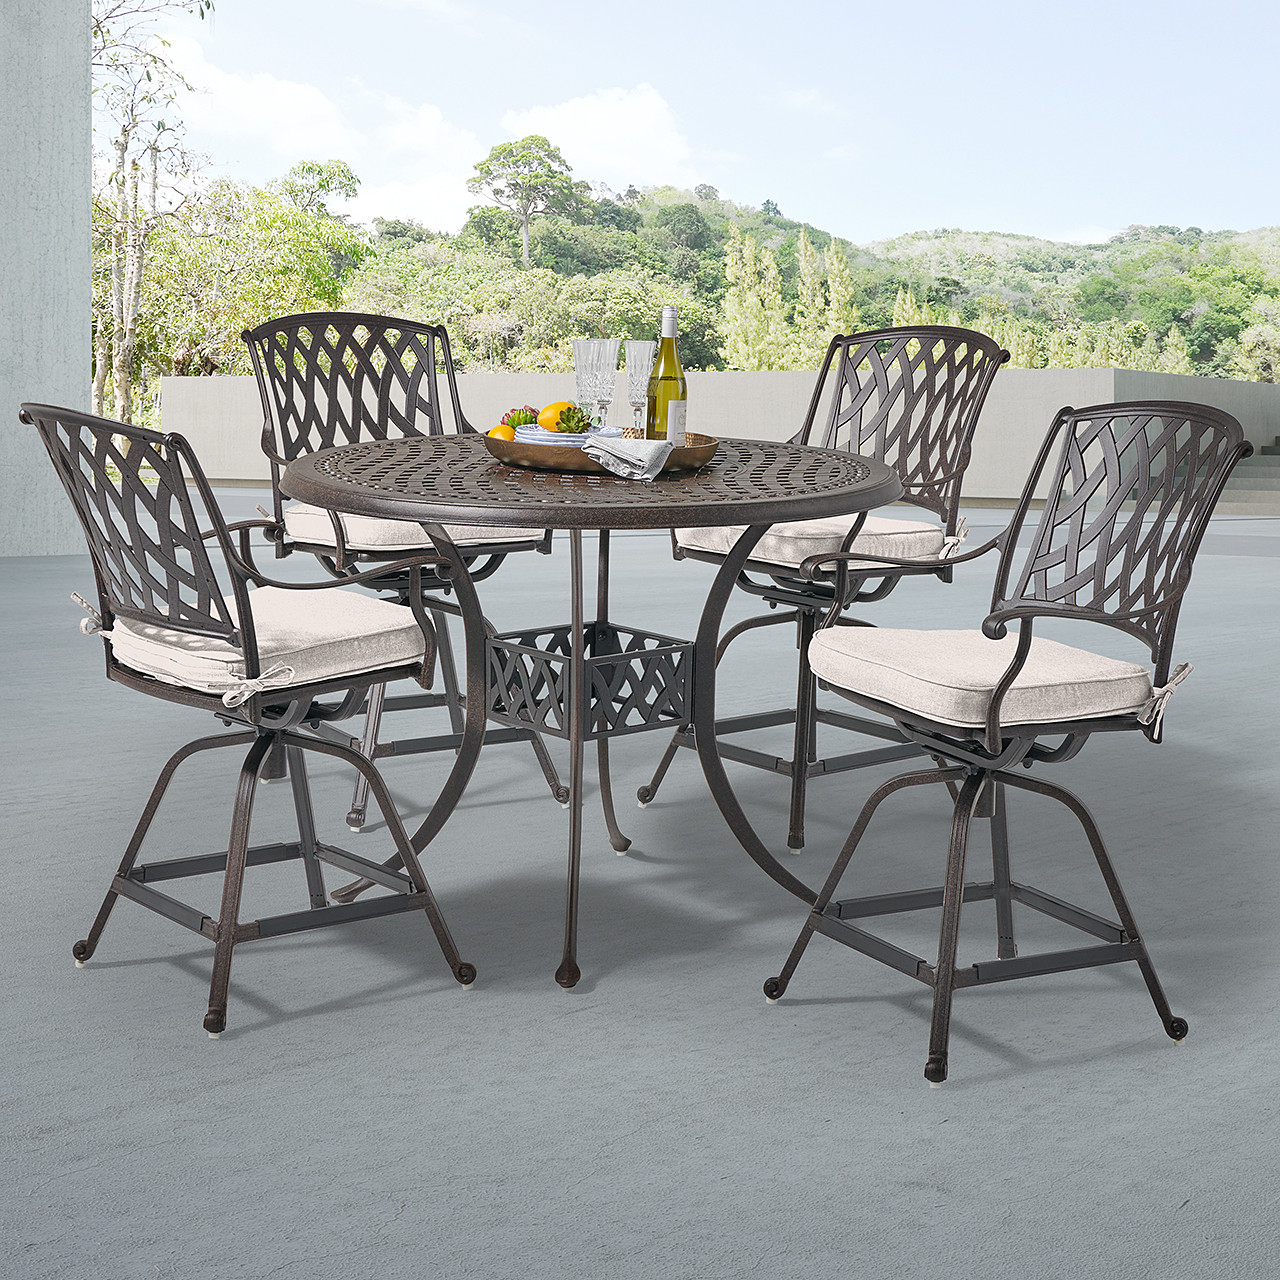 Tivoli Aged Bronze Cast Aluminum with Cushions 5 Piece Swivel Gathering Height Set + 48 in. D Gathering Height Table